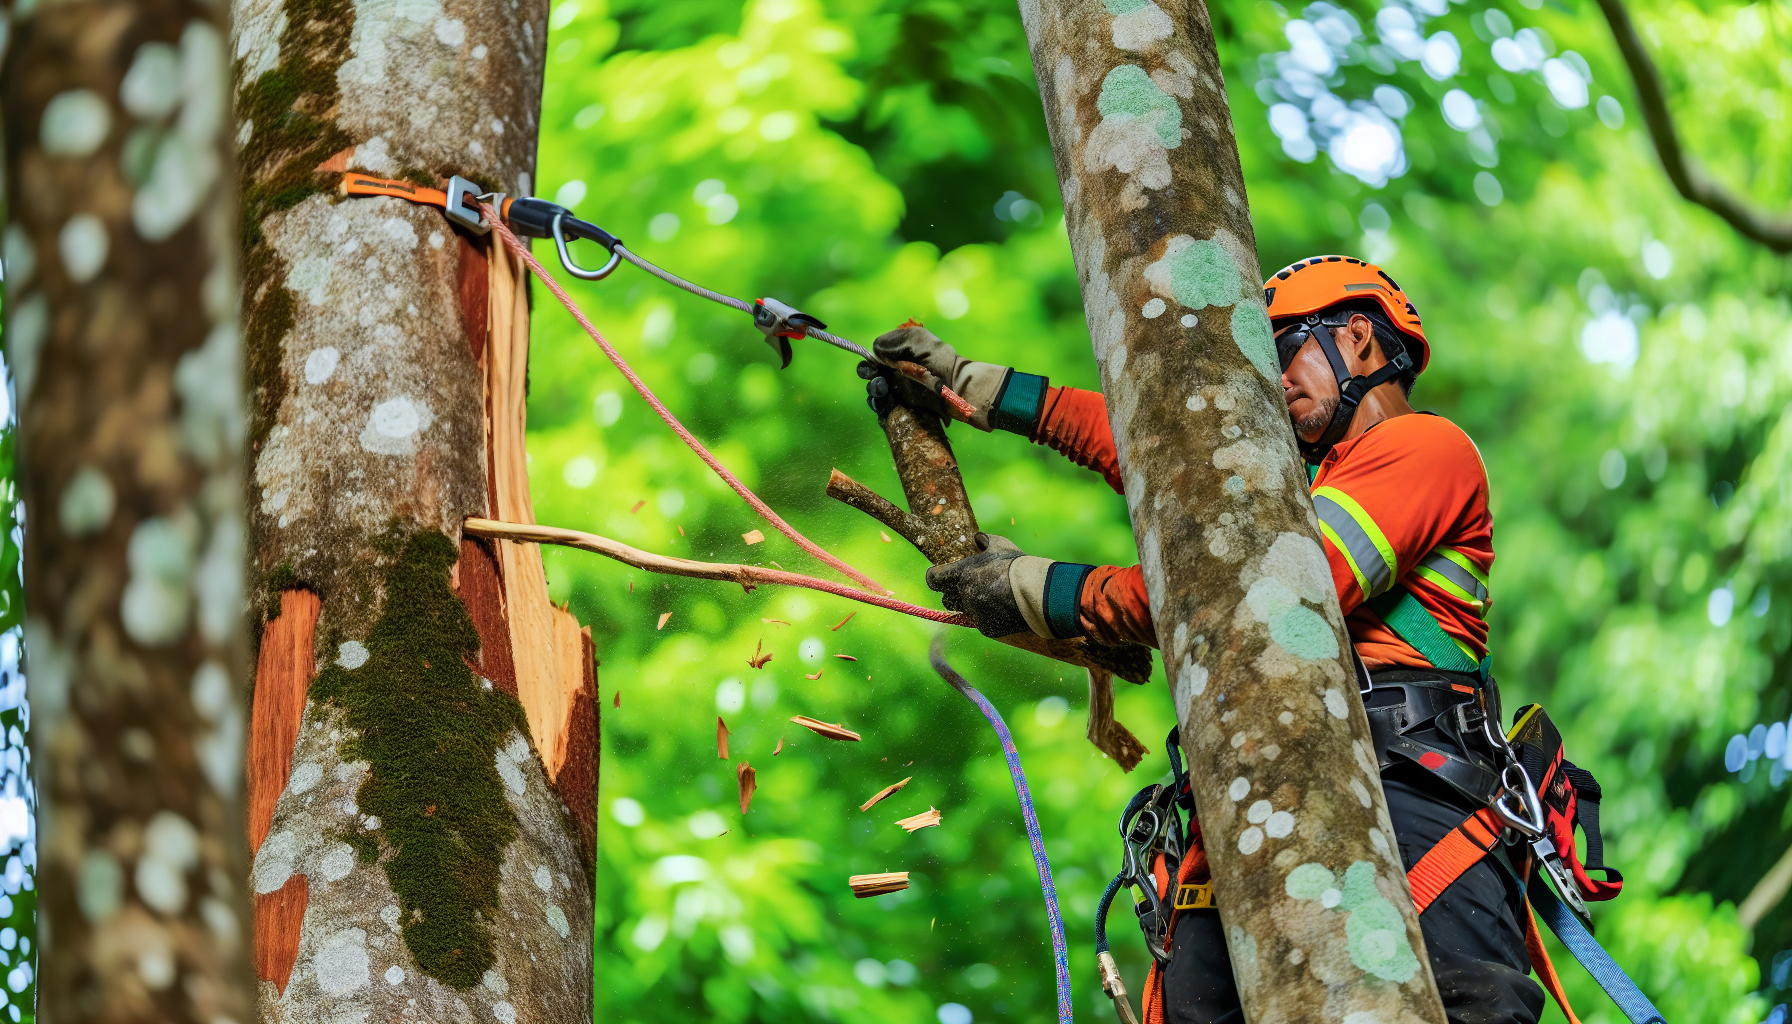 A professional arborist using specialized equipment to remove a large tree limb safely